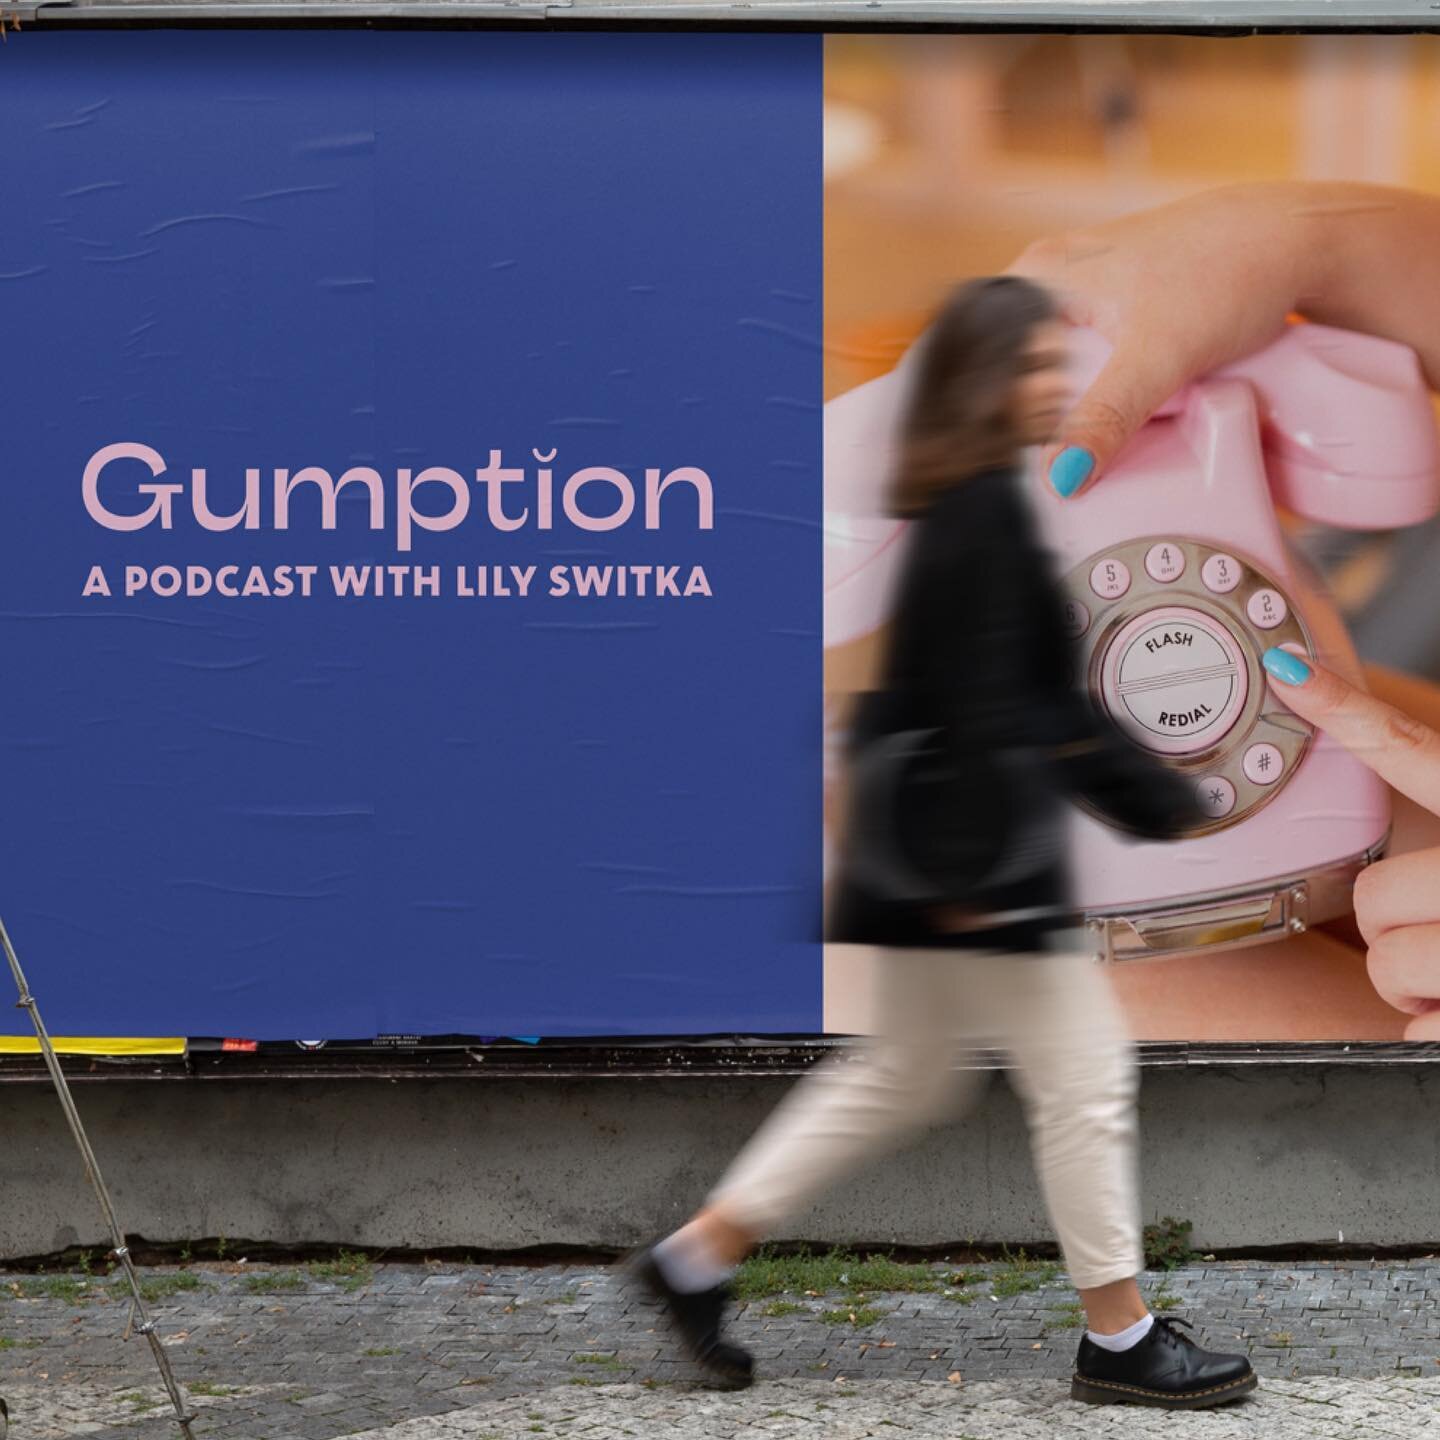 In honor of season 2 releasing today we wanted to share the re-brand we did for Gumption Podcast a few months ago. 

Gumption 2.0 is spontaneous &amp; whimsical, inspiring it&rsquo;s audience to embrace life with a light-hearted spirit &amp; to boldl